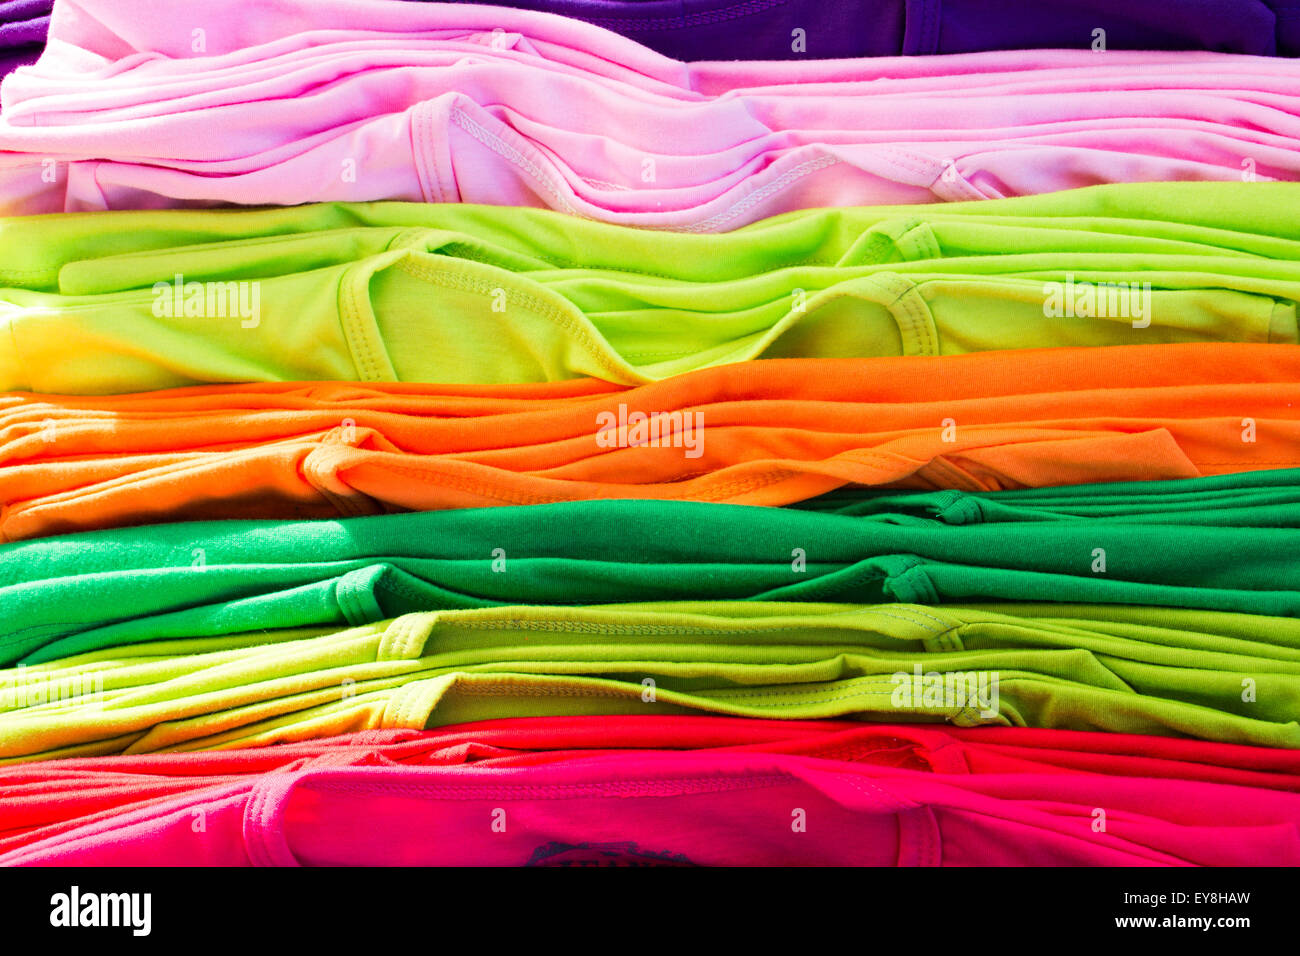 Lots of bright colorful clothing, abstract background. Stock Photo